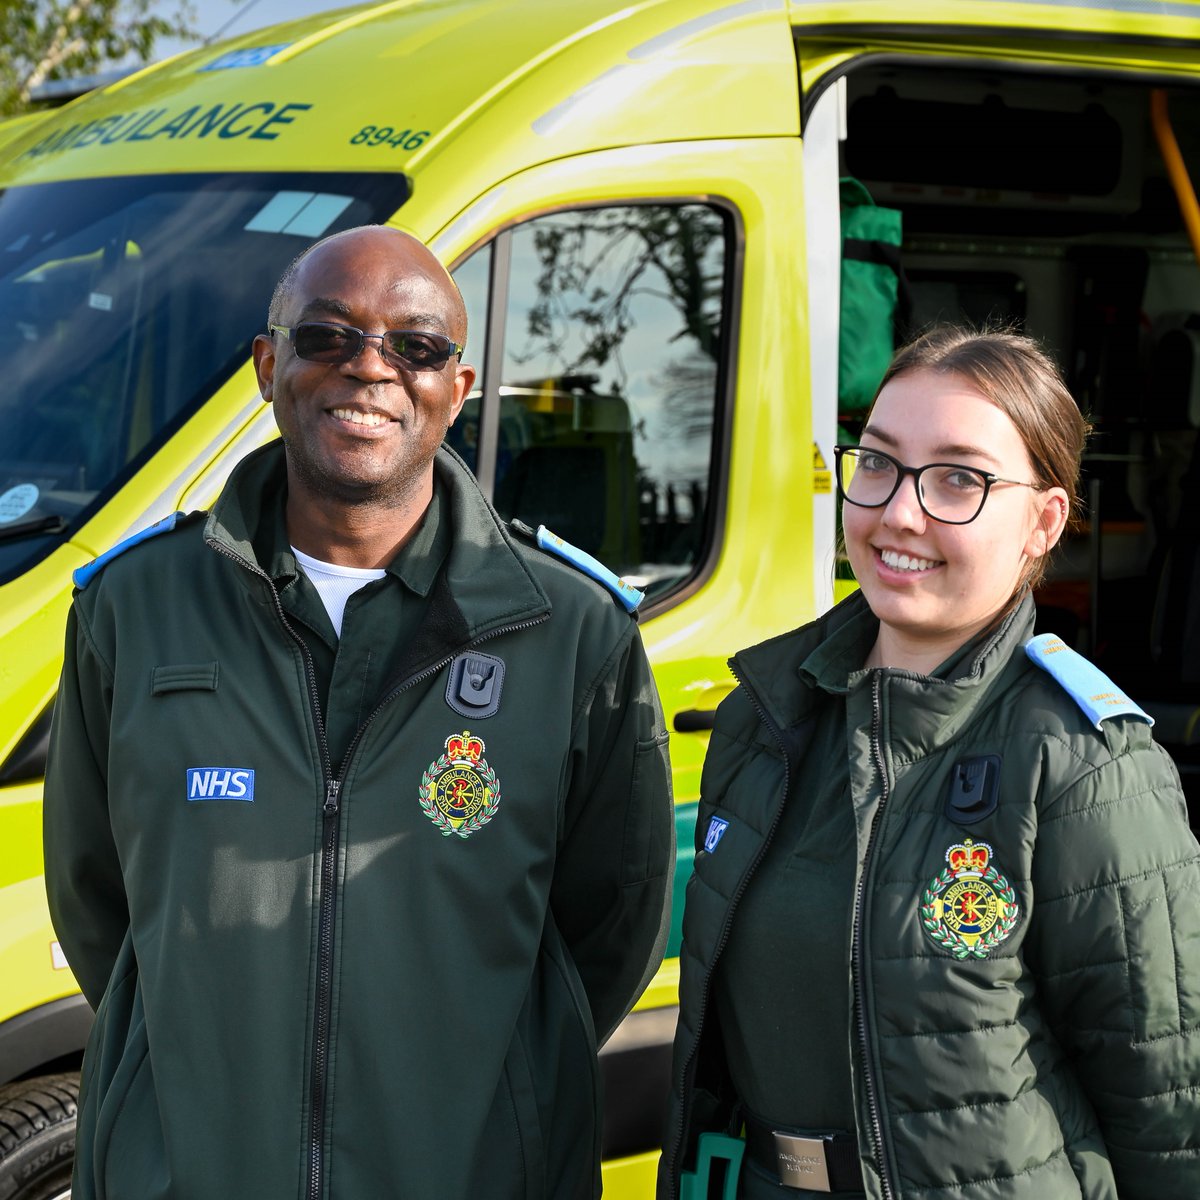 Non-Emergency Transport Service crews like Eddie and Rebecca are trained in basic life-support and help to keep emergency ambulances free for patients who need them most. Find out how you can kickstart your frontline career by applying for this role: buff.ly/3QBkShg